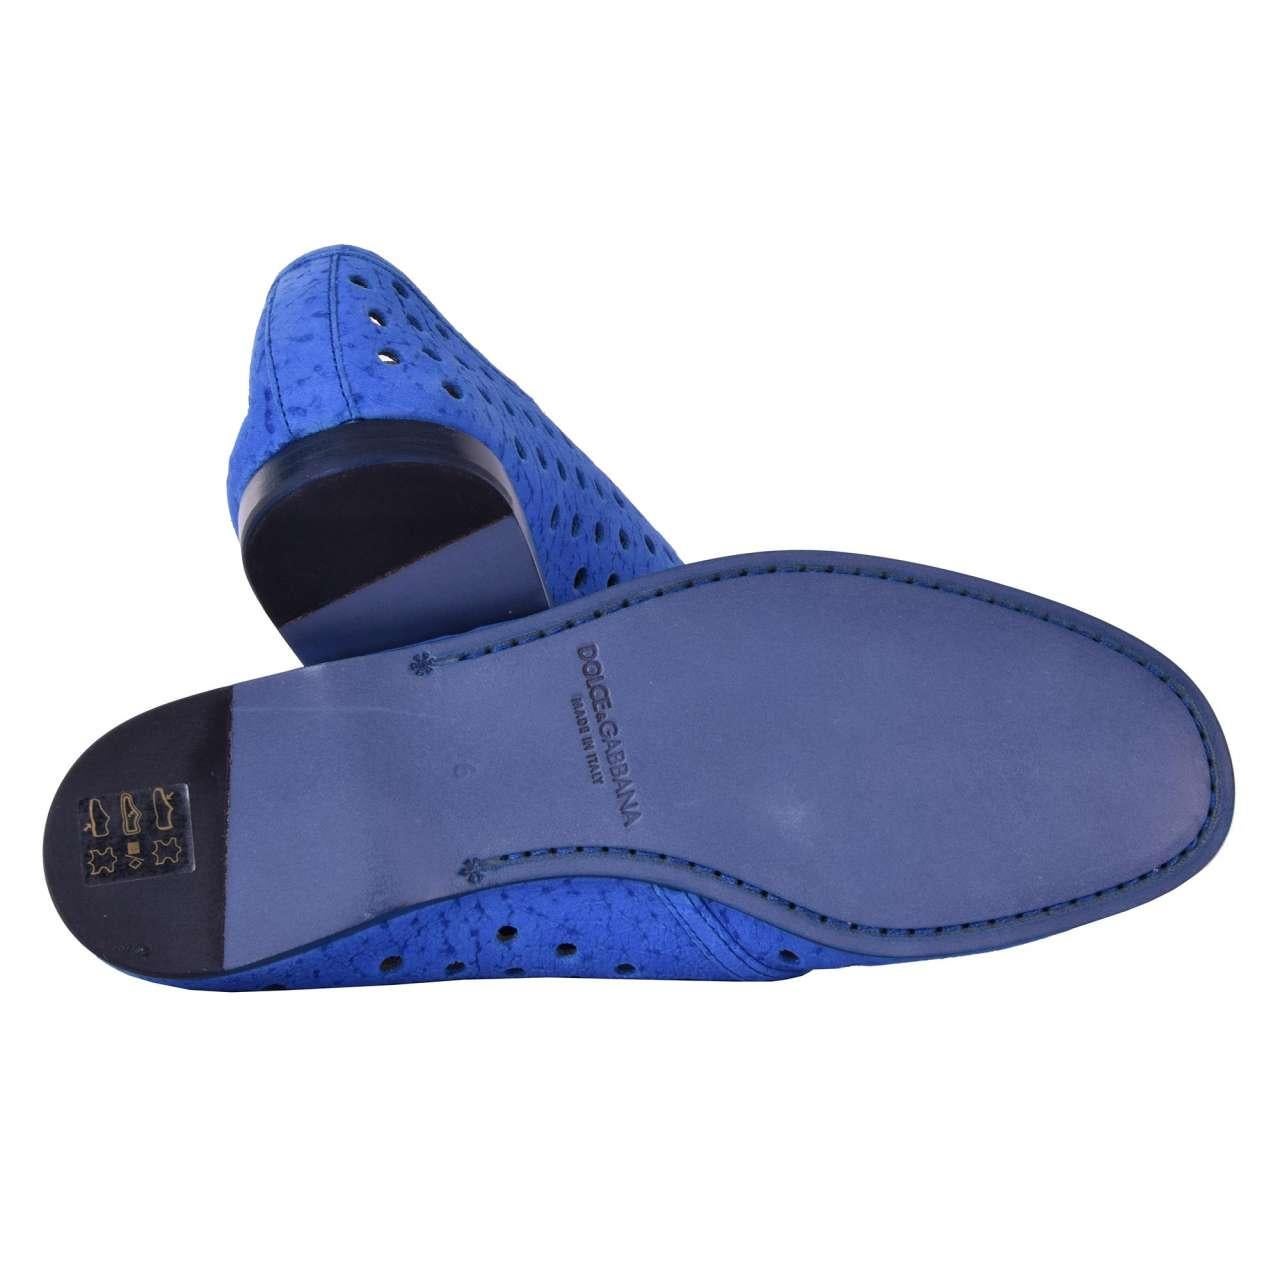 - Perforated suede derby shoes AMALFI with circle holes by DOLCE & GABBANA Black Label - MADE IN ITALY - New with Box - Former RRP: EUR 445 - Model: CA6094-AC155-80650 - Material: 100% Calfskin (Suede) - Sole: Leather - Color: Blue - Leather and